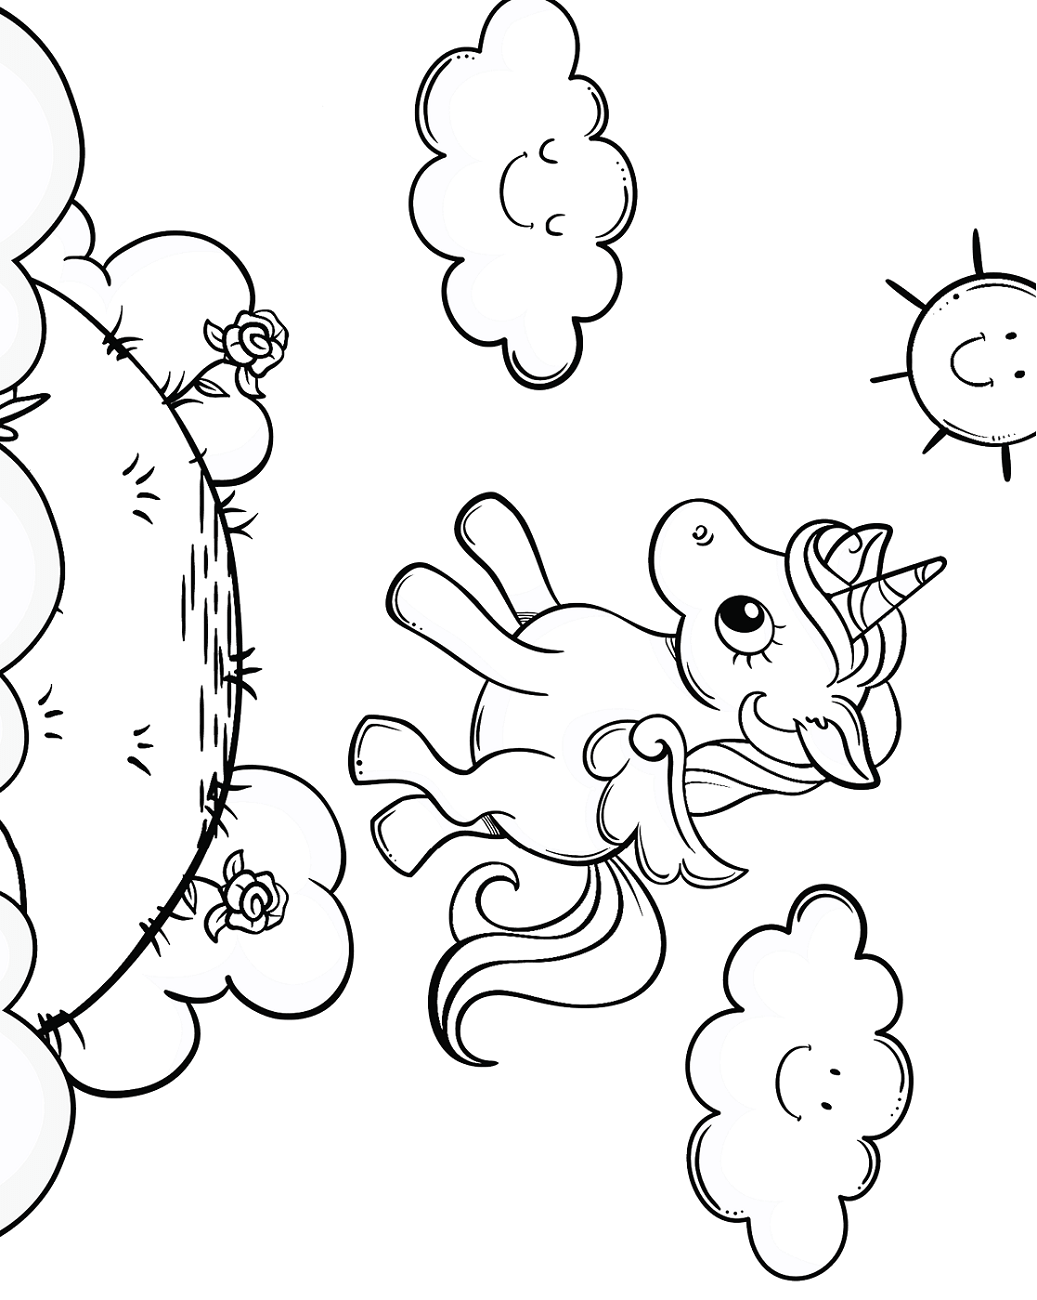 Baby Unicorn Flying Coloring Page - Free Printable Coloring Pages for Kids